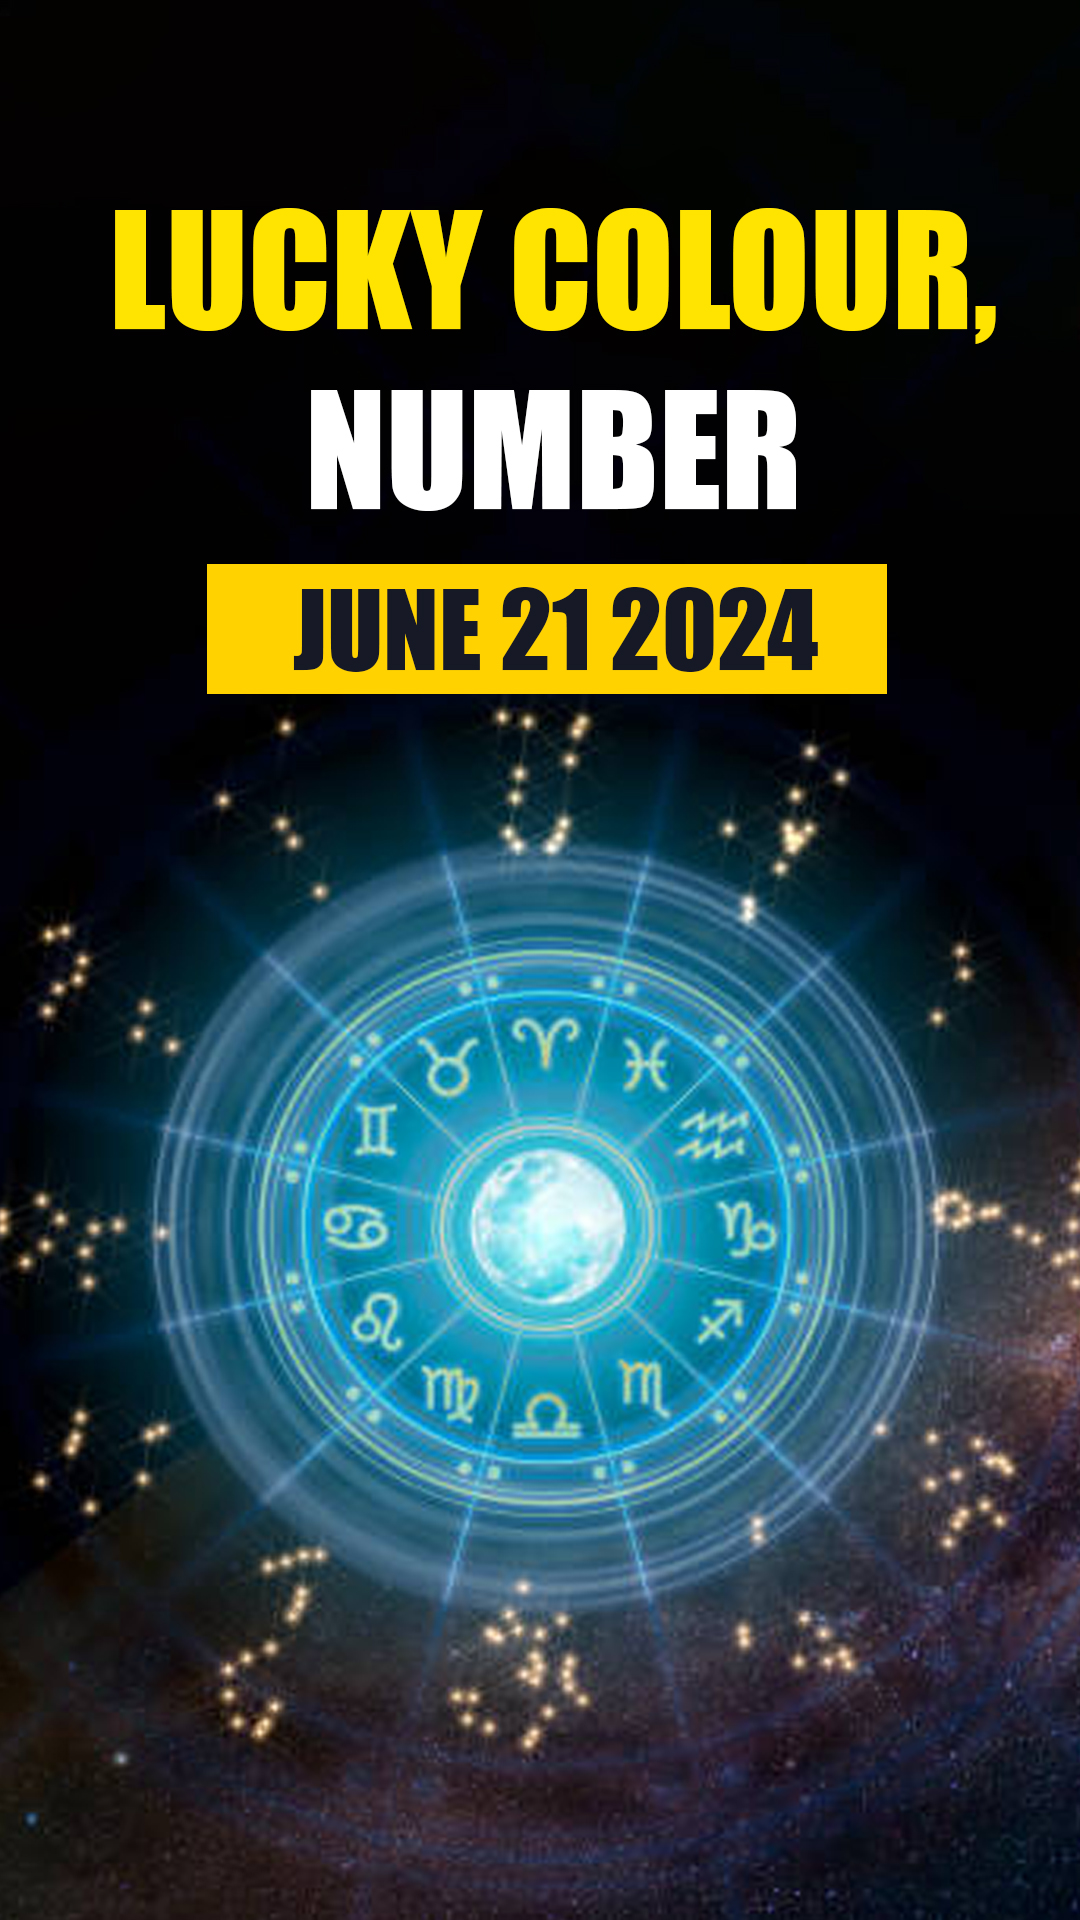 Know lucky colour, number of all zodiac signs in horoscope for June 21, 2024